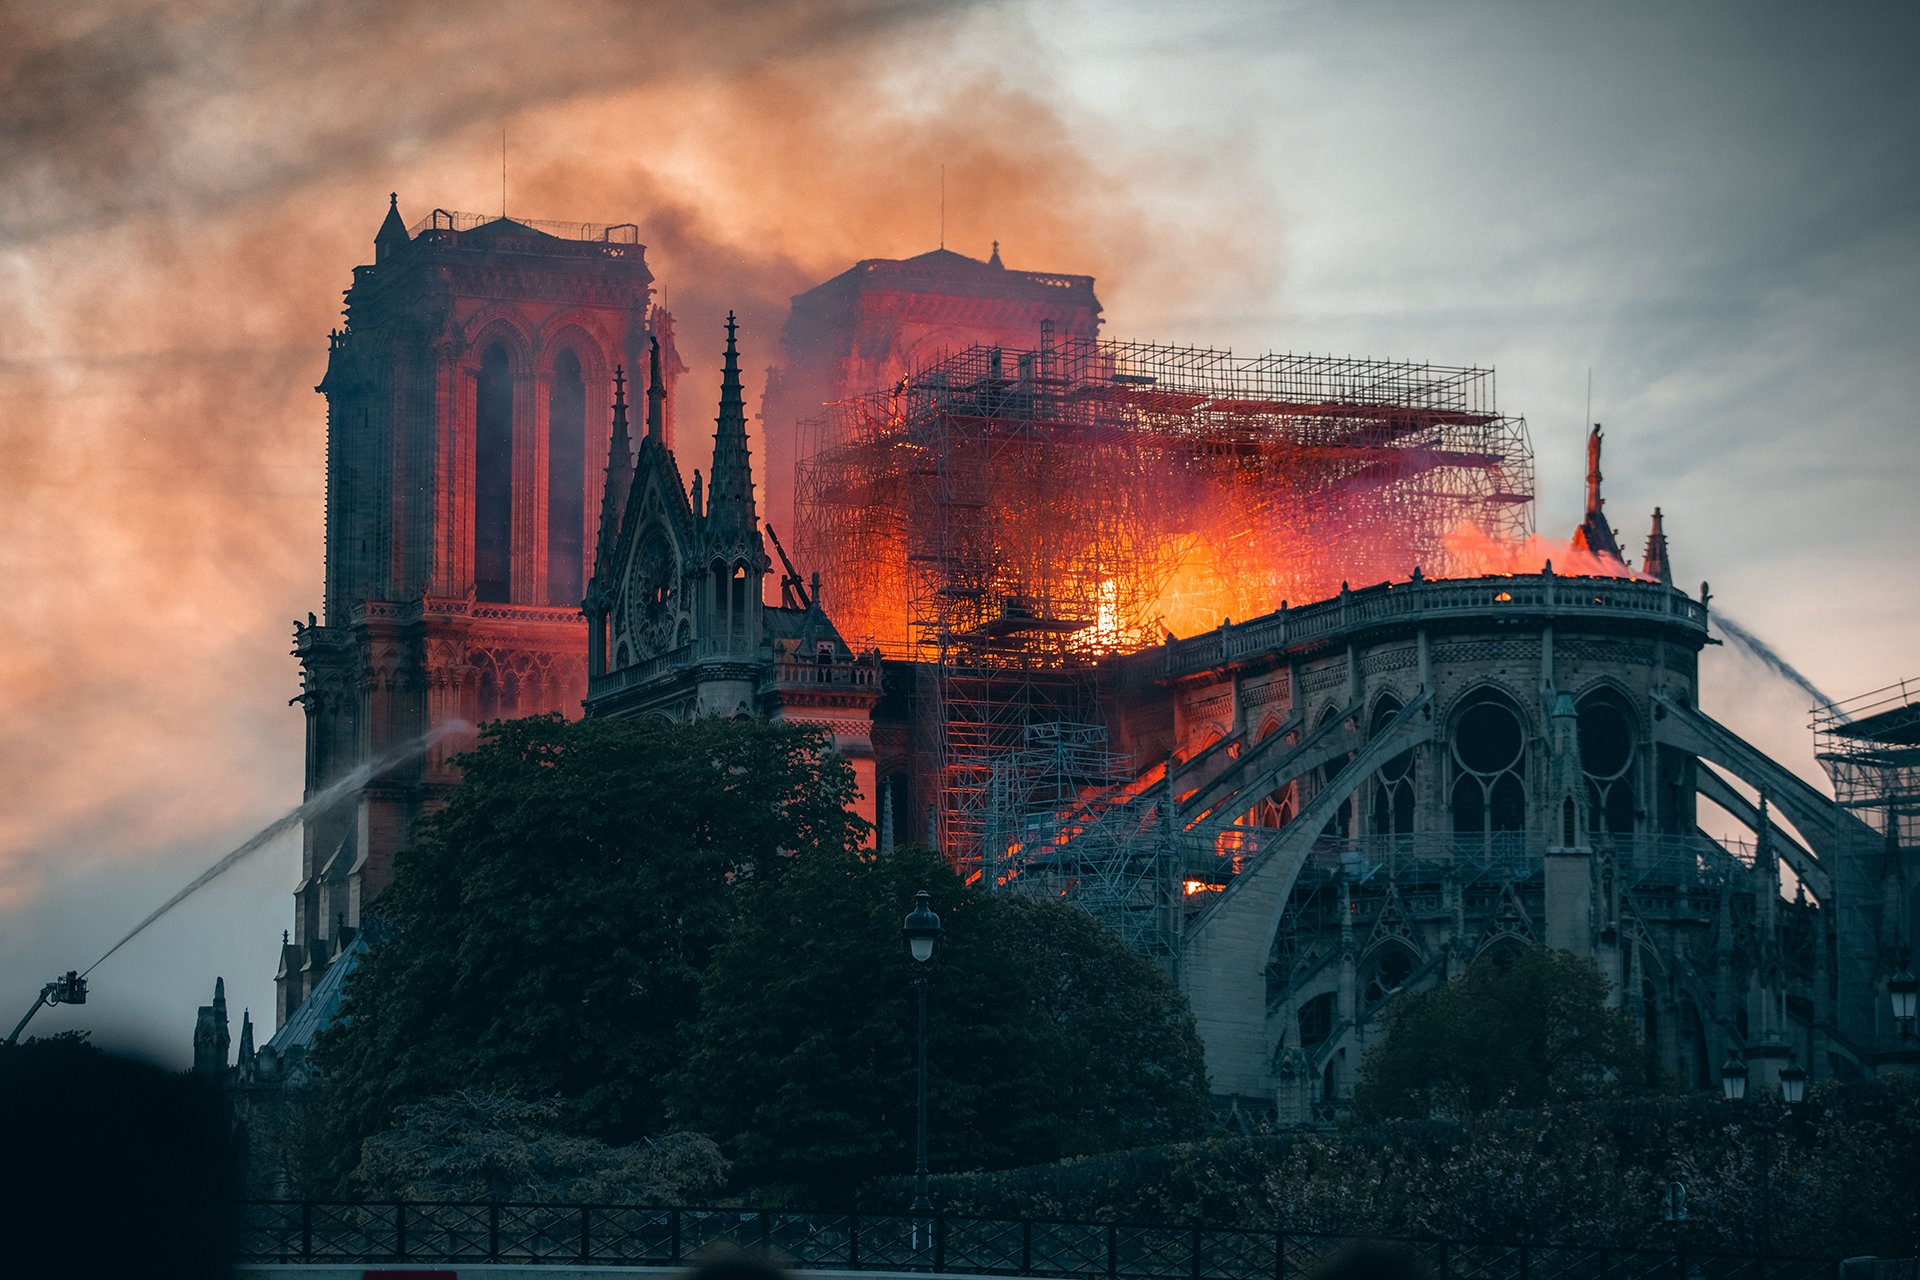 Fire engulfed the Notre Dame cathedral on April 15, 2019